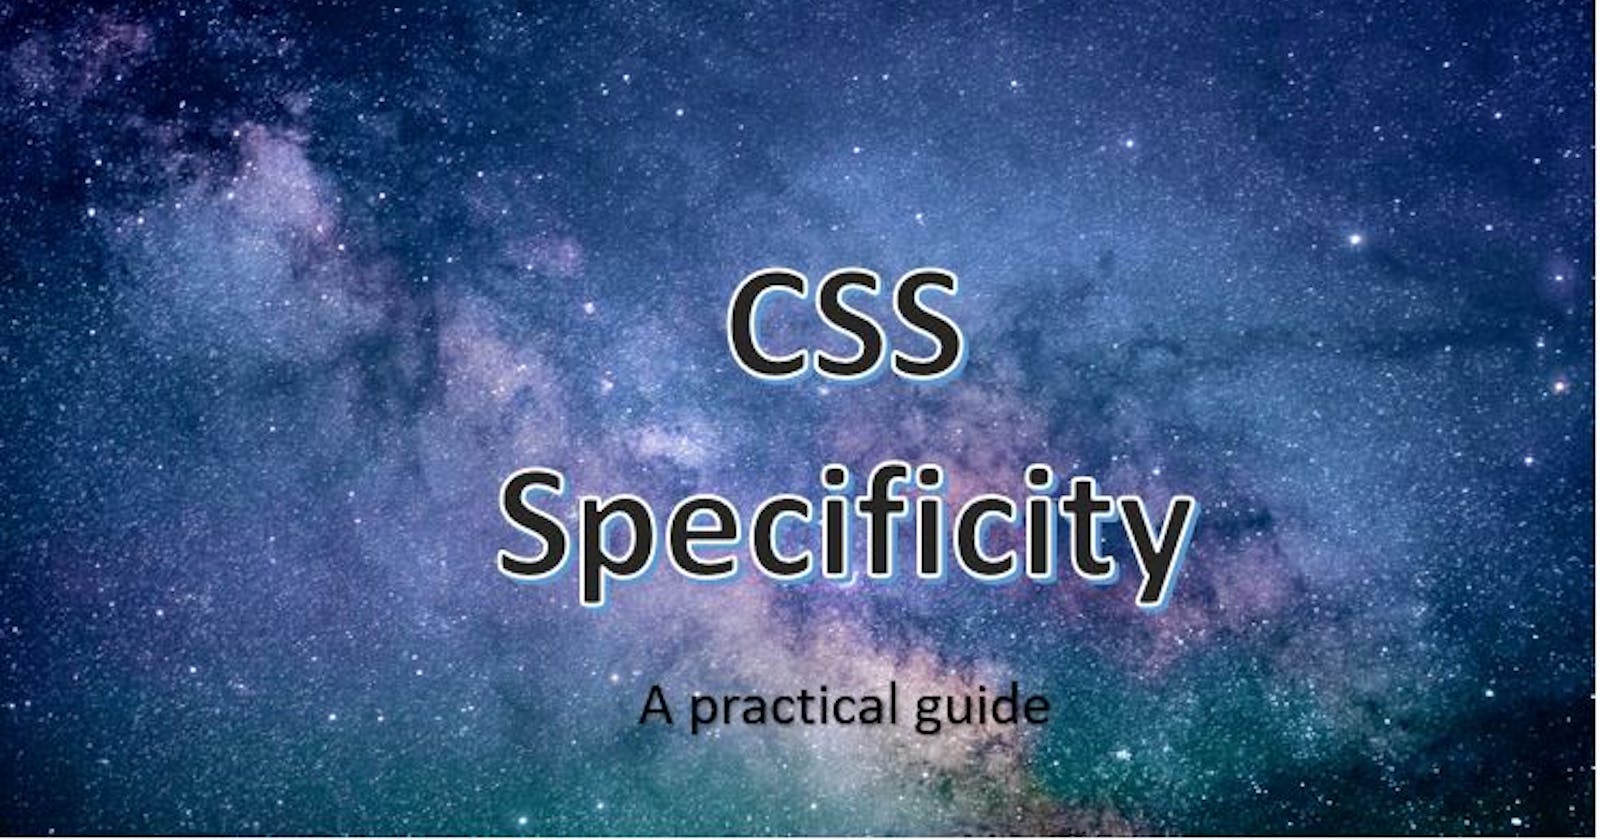 A Practical guide to CSS Specificity